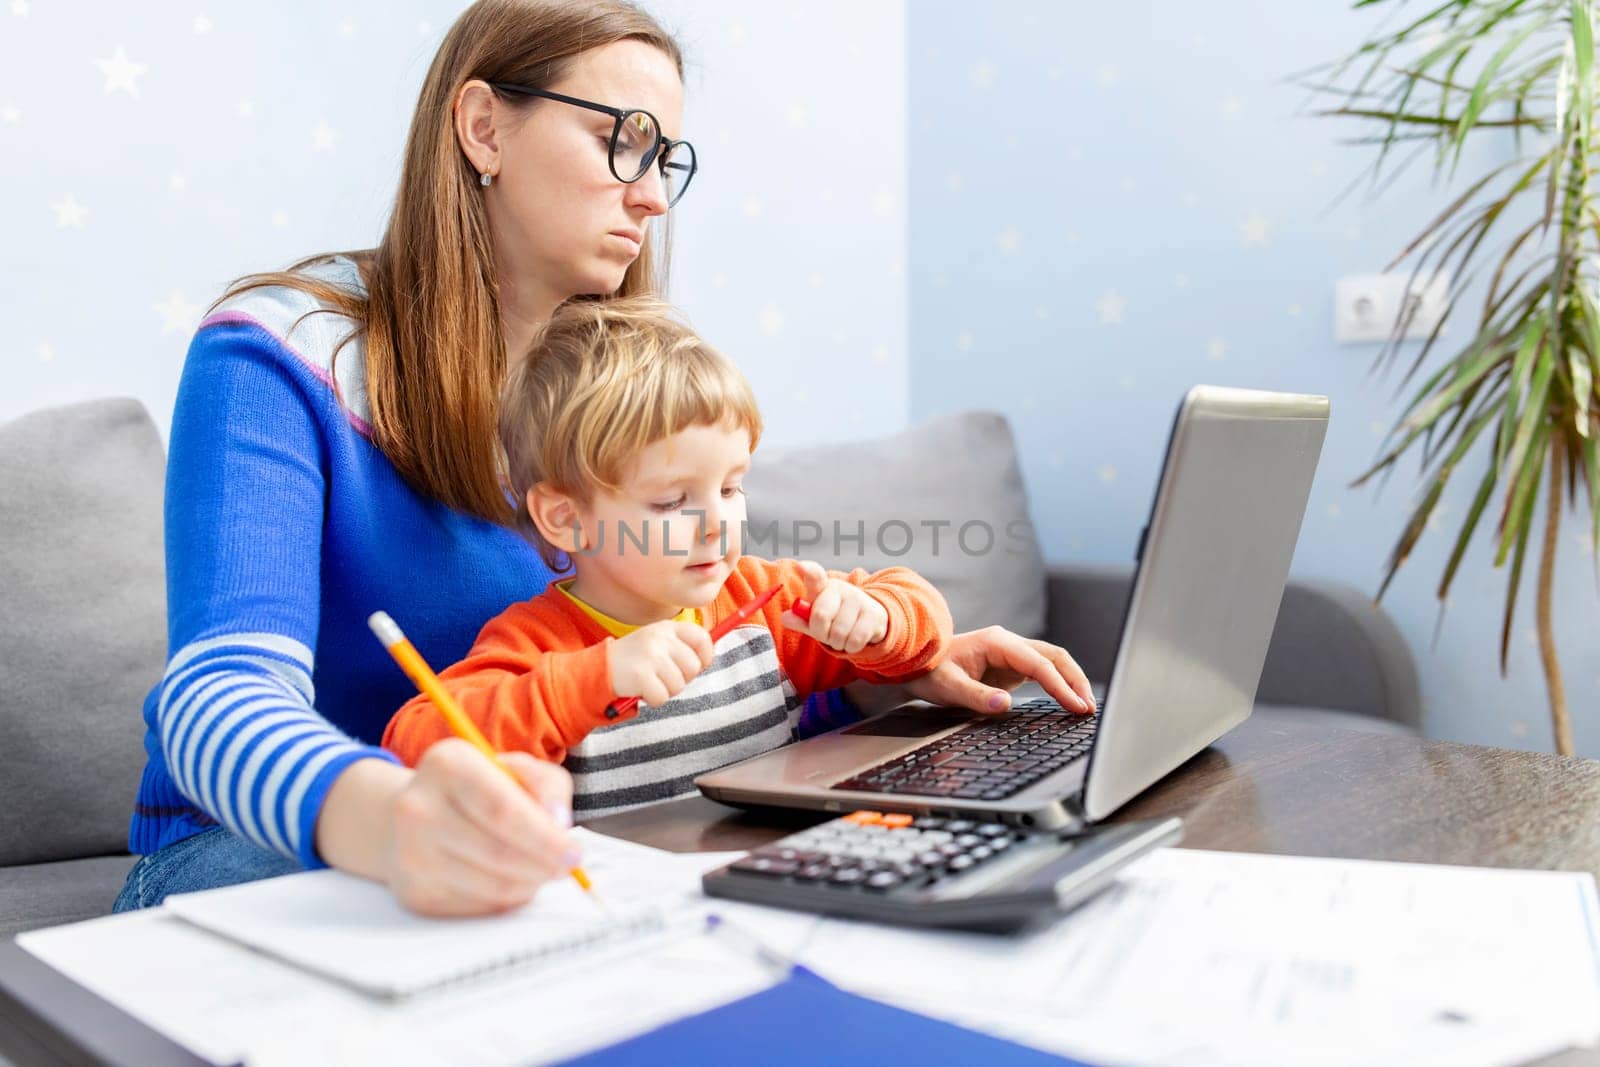 Business woman is working at home on a laptop with her baby. Concept of female business, working mom, freelancing, home office. Lifestyle moment.